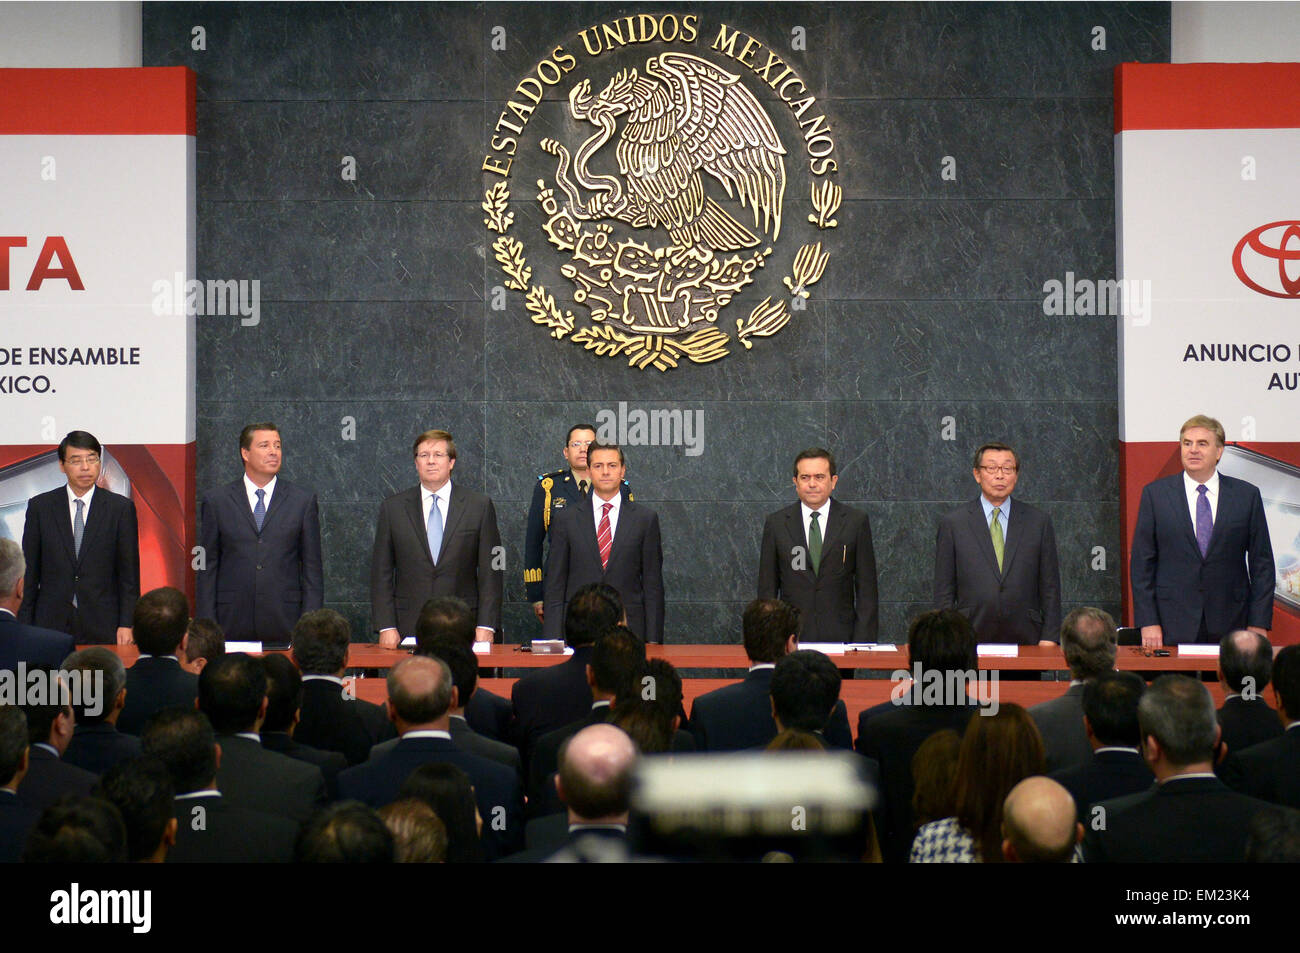 Mexico City, Mexico. 15th Apr, 2015. Image provided by Mexico's Presidency shows Mexican President Enrique Pena Nieto (C) taking part in the ceremony to announce the investment of the Toyota automotive assembly plant, in Mexico City, capital of Mexico, on April 15, 2015. © Mexico's Presidency/Xinhua/Alamy Live News Stock Photo